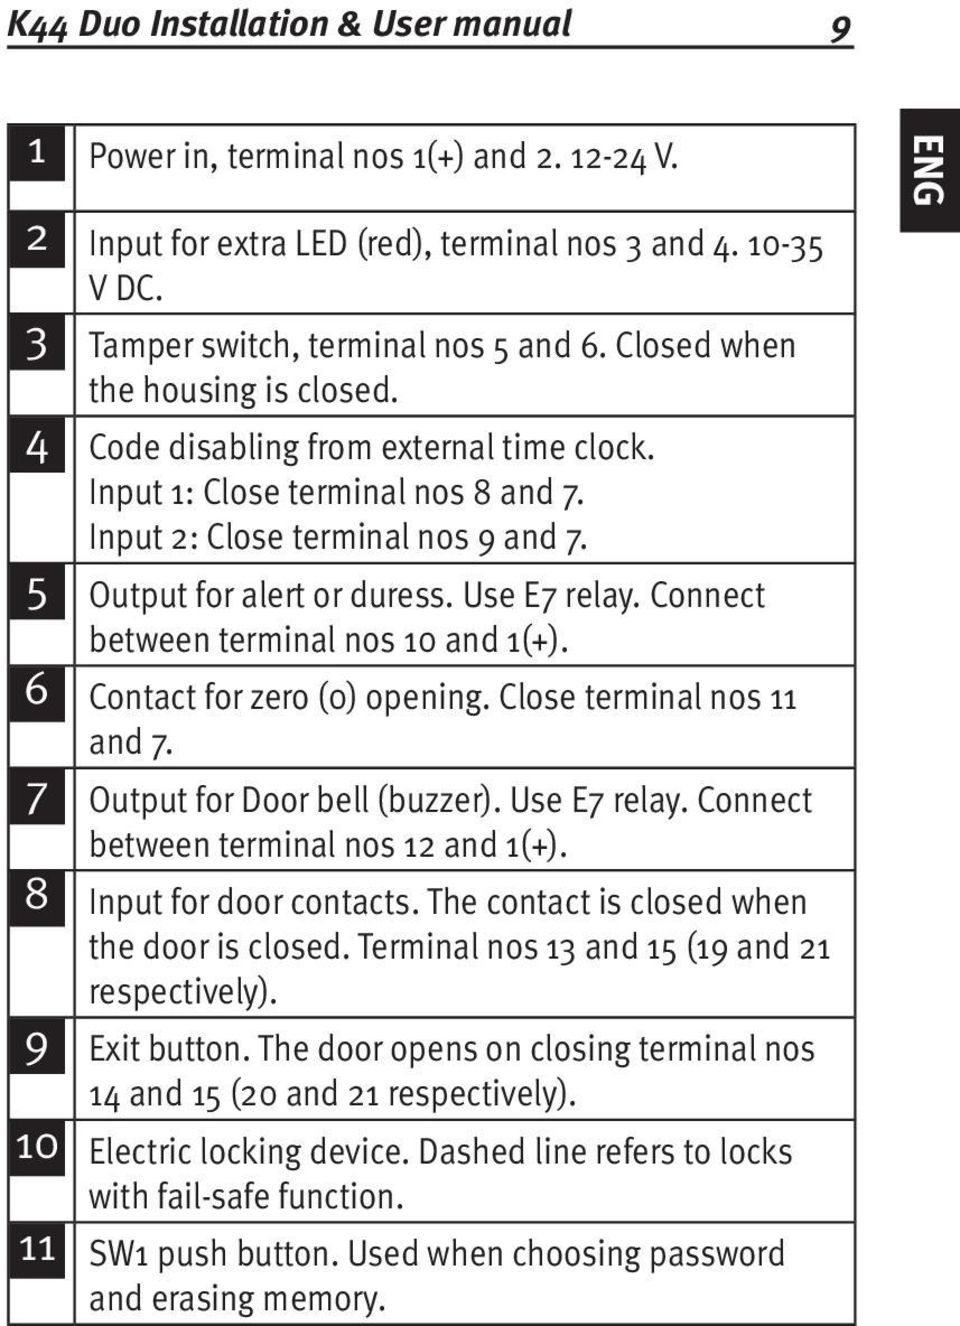 Connect between terminal nos 10 and 1(+). 6 Contact for zero (0) opening. Close terminal nos 11 and 7. 7 Output for Door bell (buzzer). Use E7 relay. Connect between terminal nos 12 and 1(+).